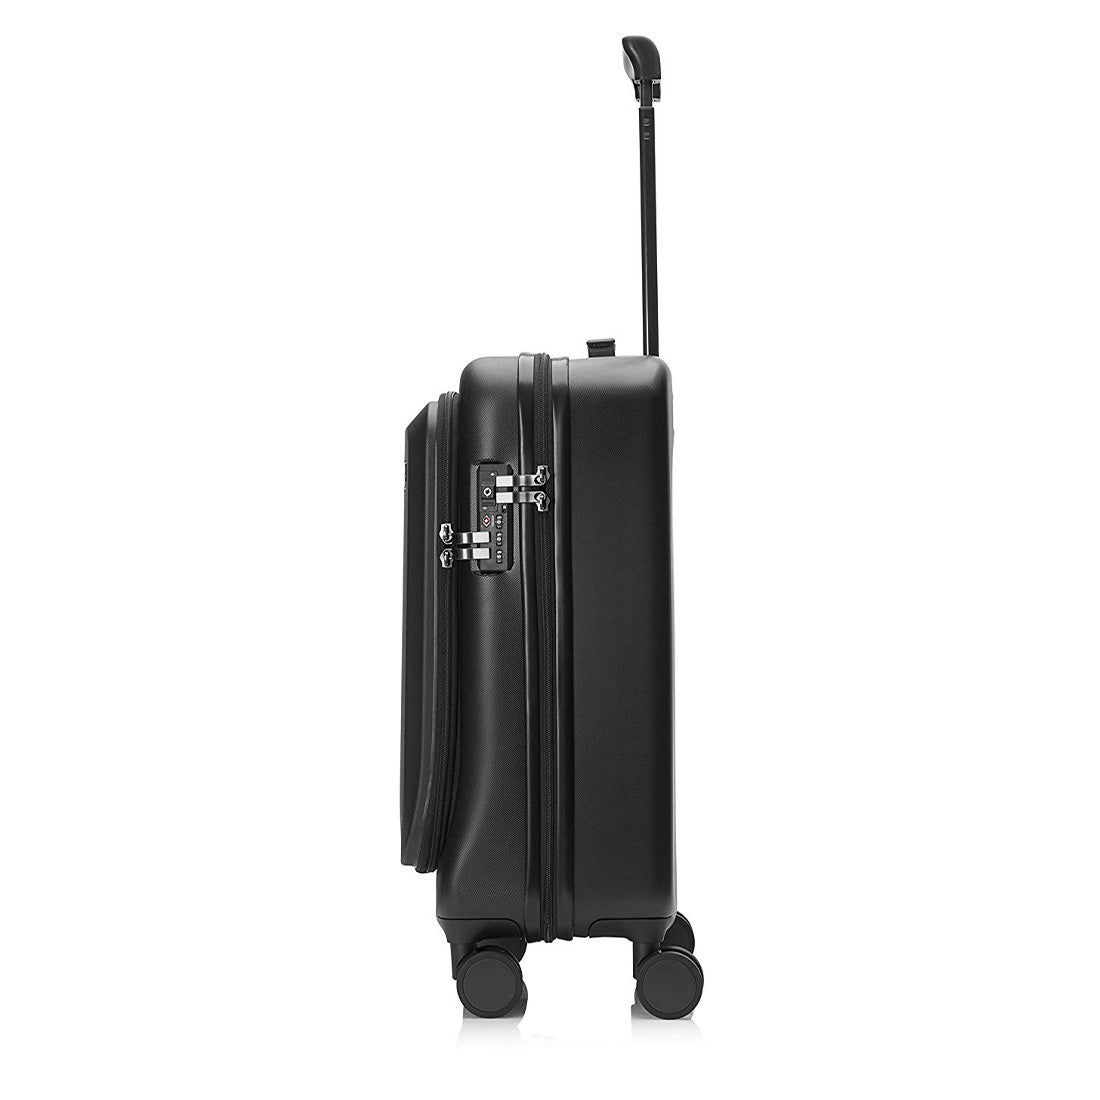 HP 20-inch Hard Case Luggage with 15.6-inch laptop compartment